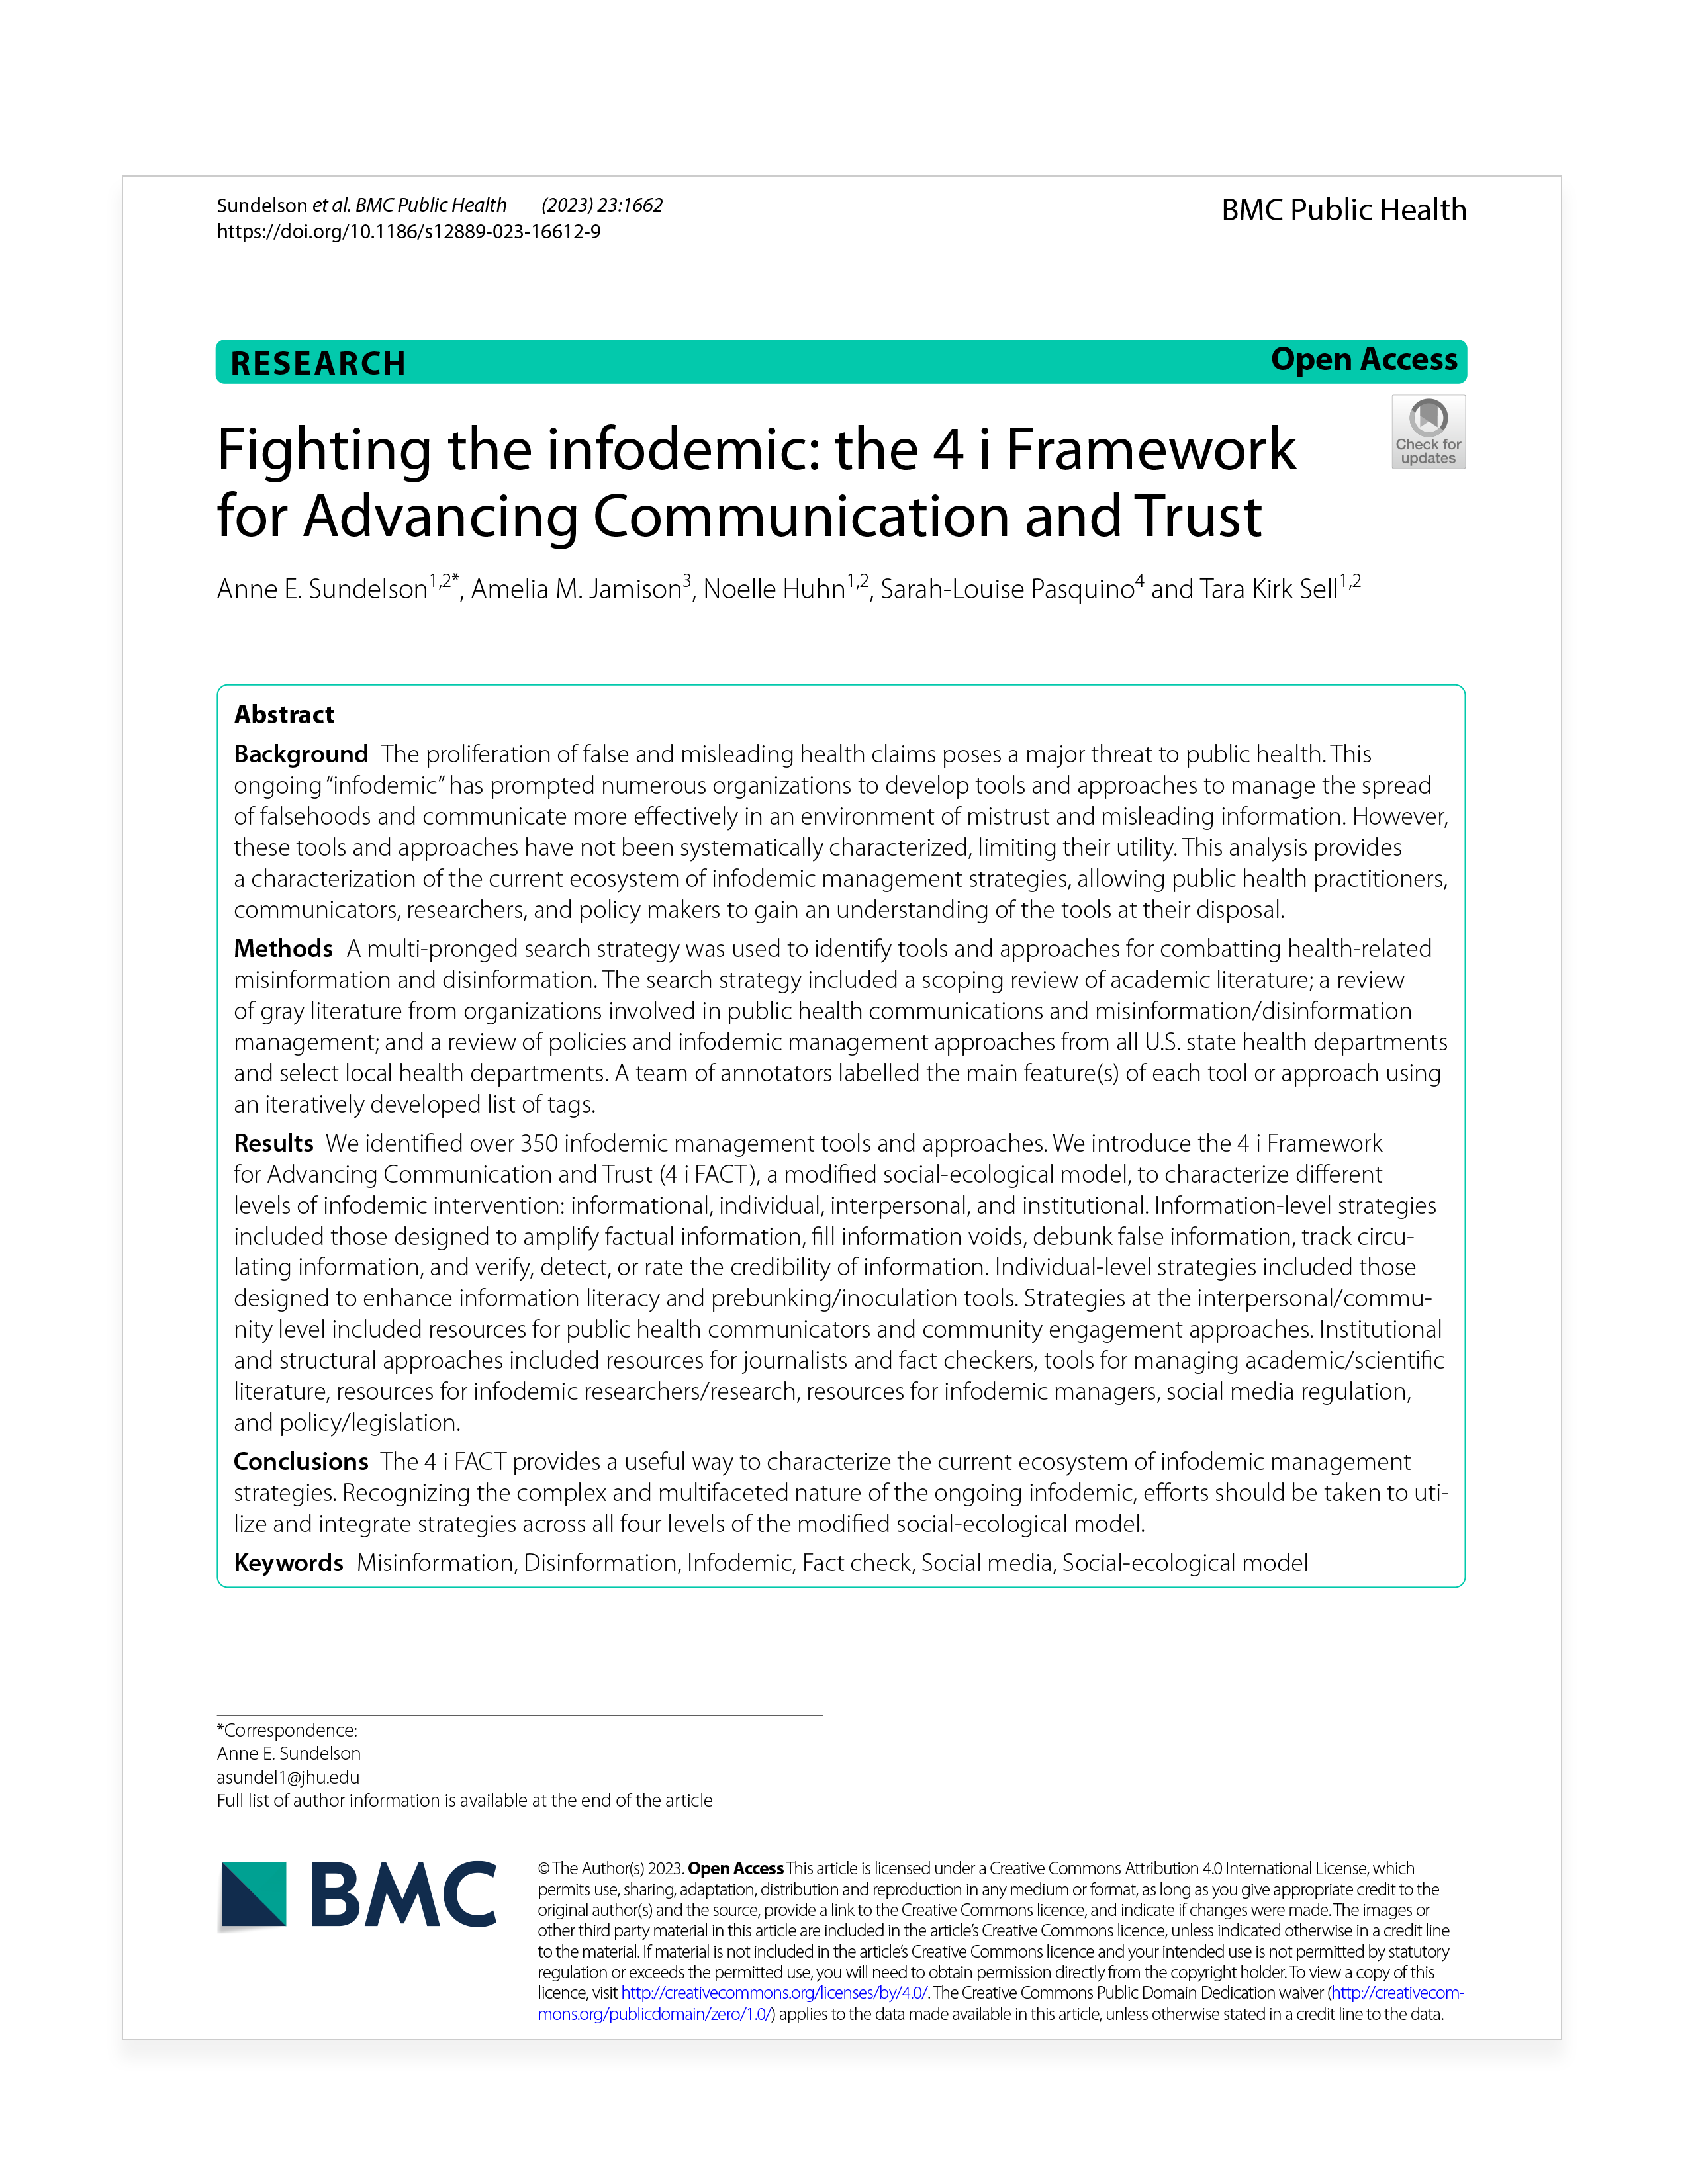 Fighting the infodemic: the 4 i Framework for Advancing Communication and Trust, screenshot